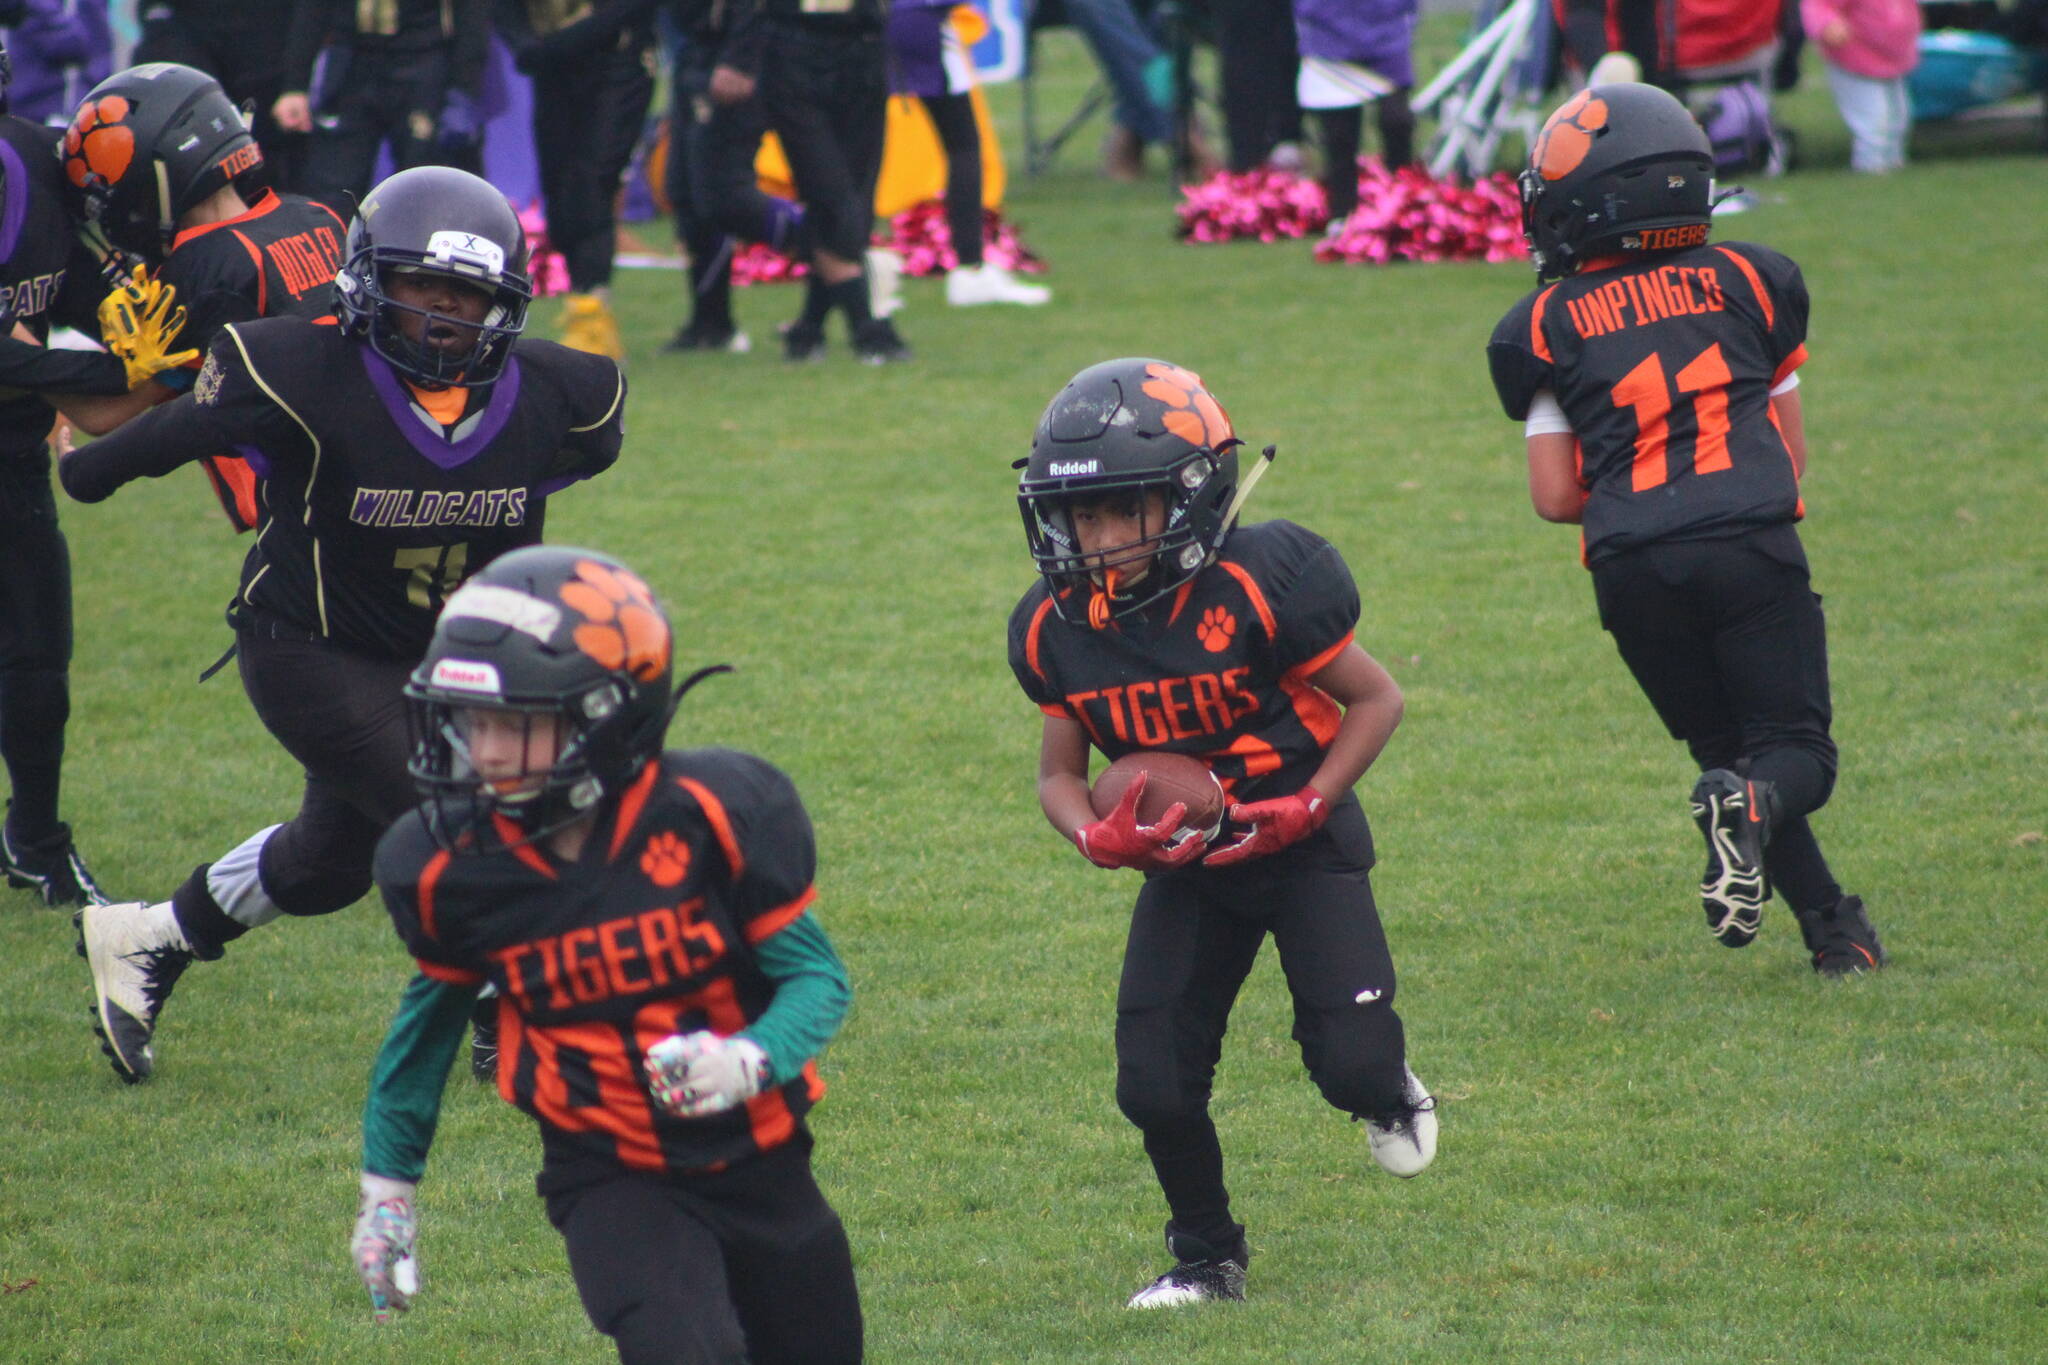 Heather Spaulding \ Staff photo
Pee Wees run to make a touchdown.